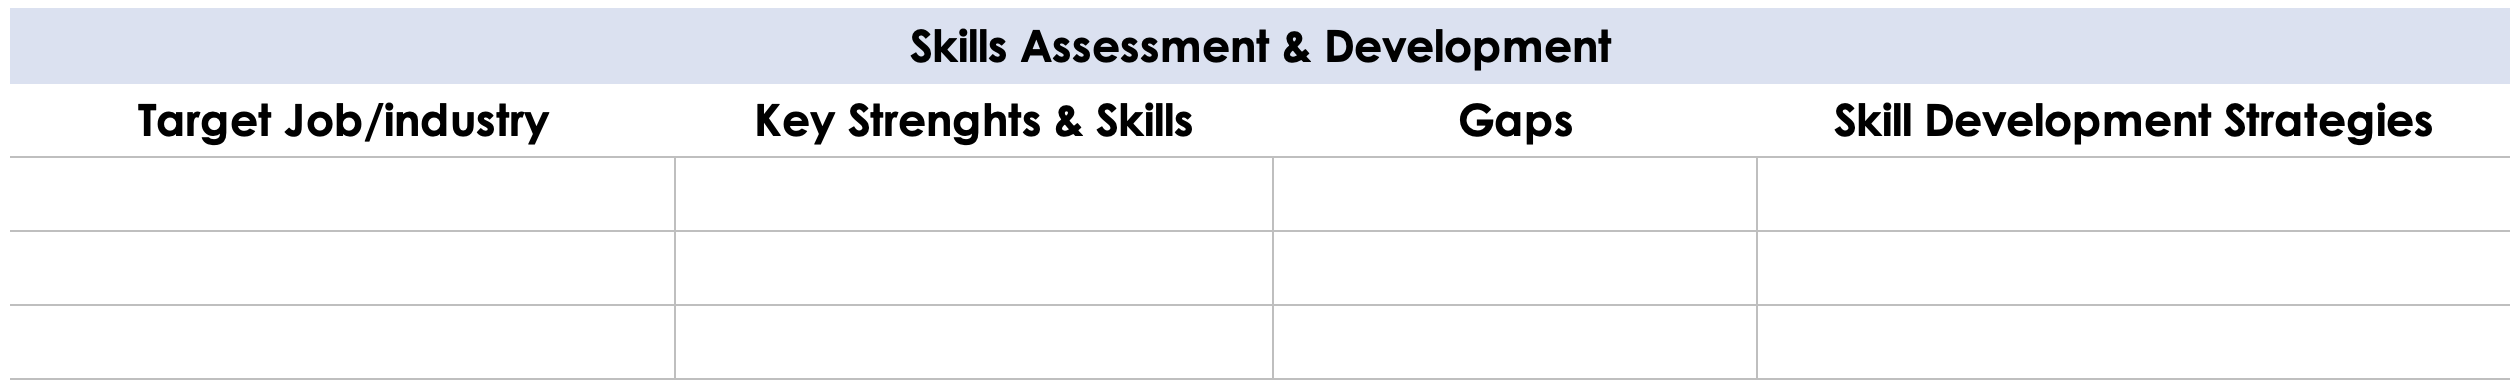 Skills assessment Section in Work Transition Plan Template